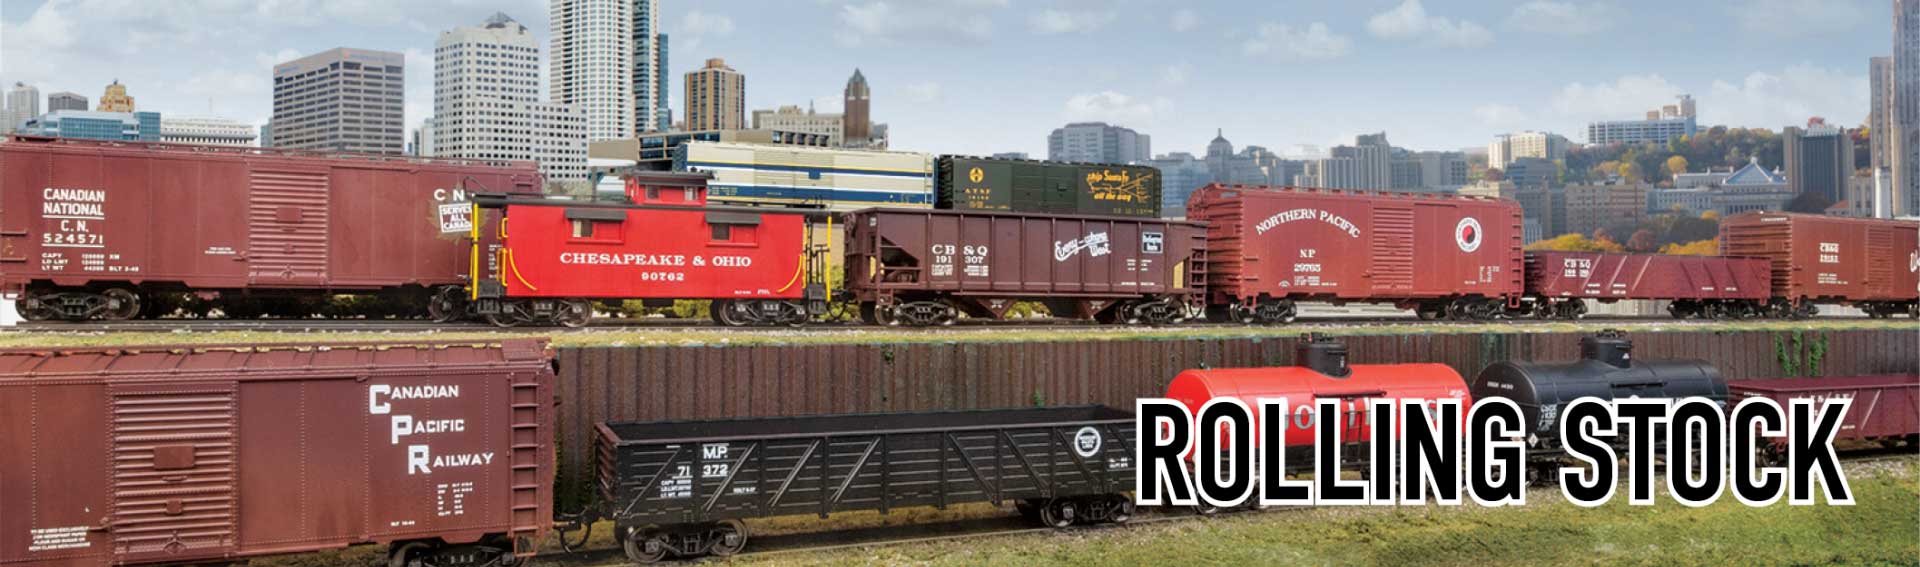 Shop all Model Railroad rolling stock in N scale, and HO scale